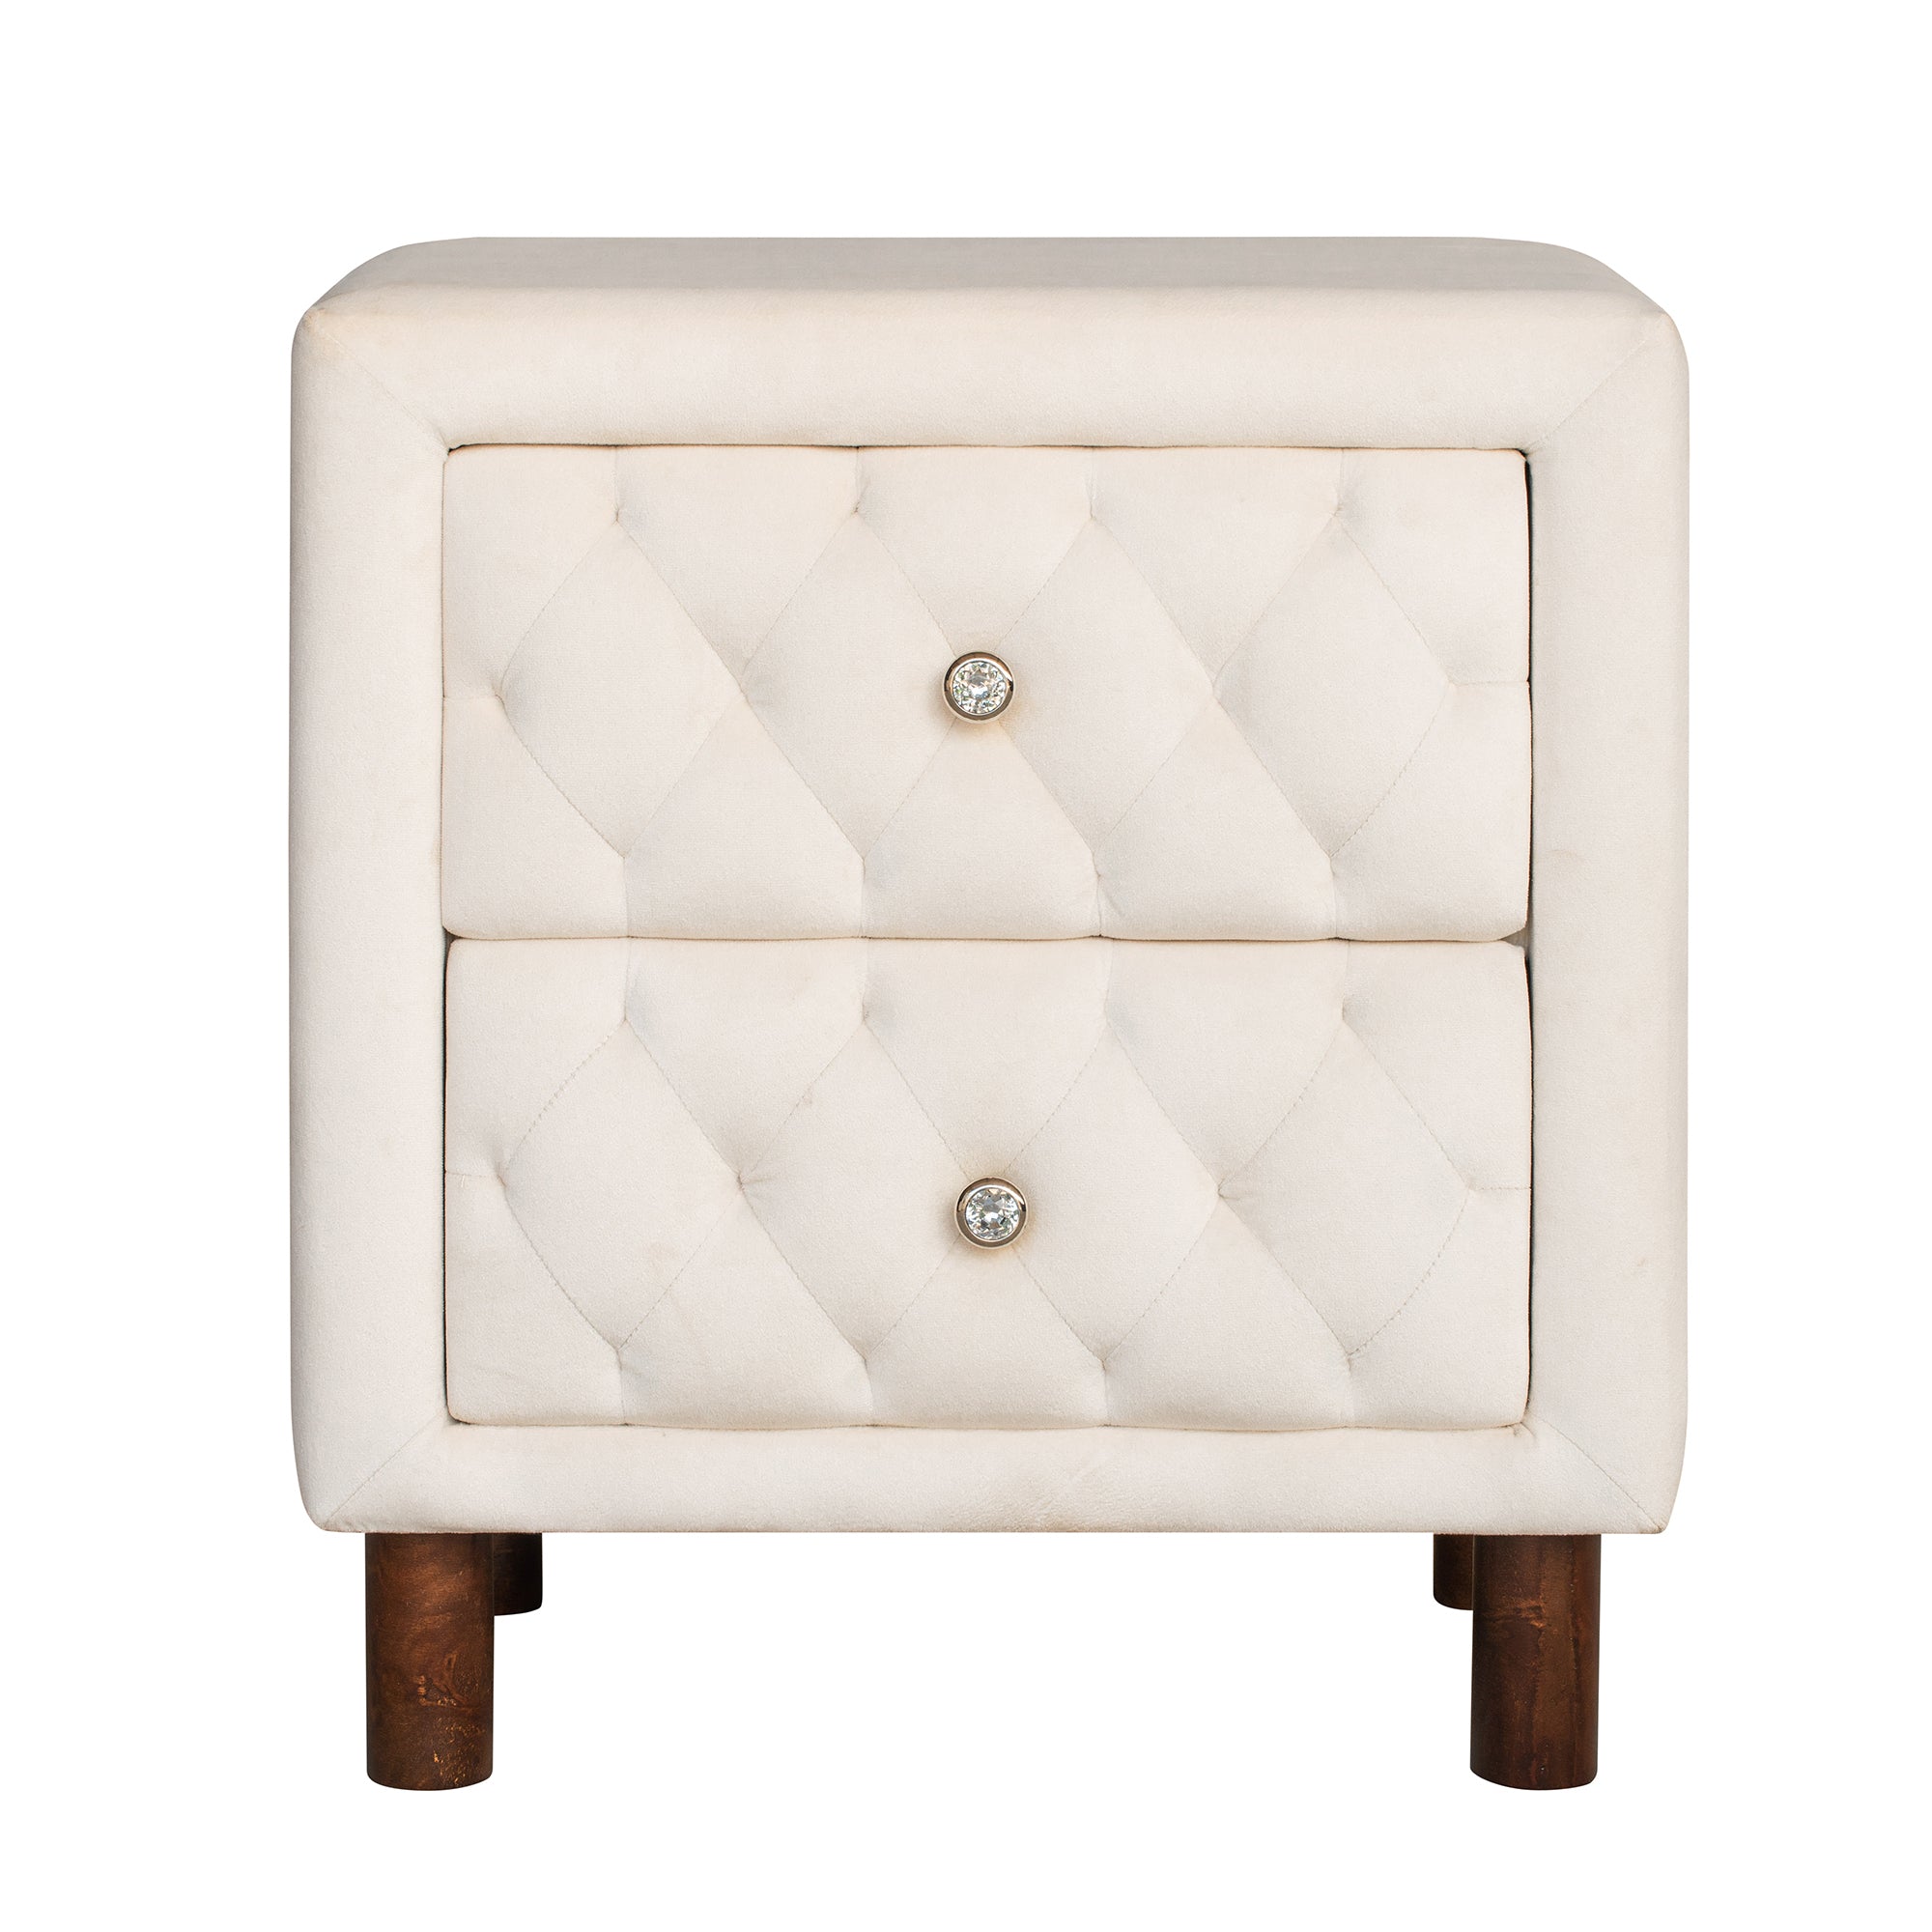 Upholstered Wooden Nightstand with Two Drawers (Beige)